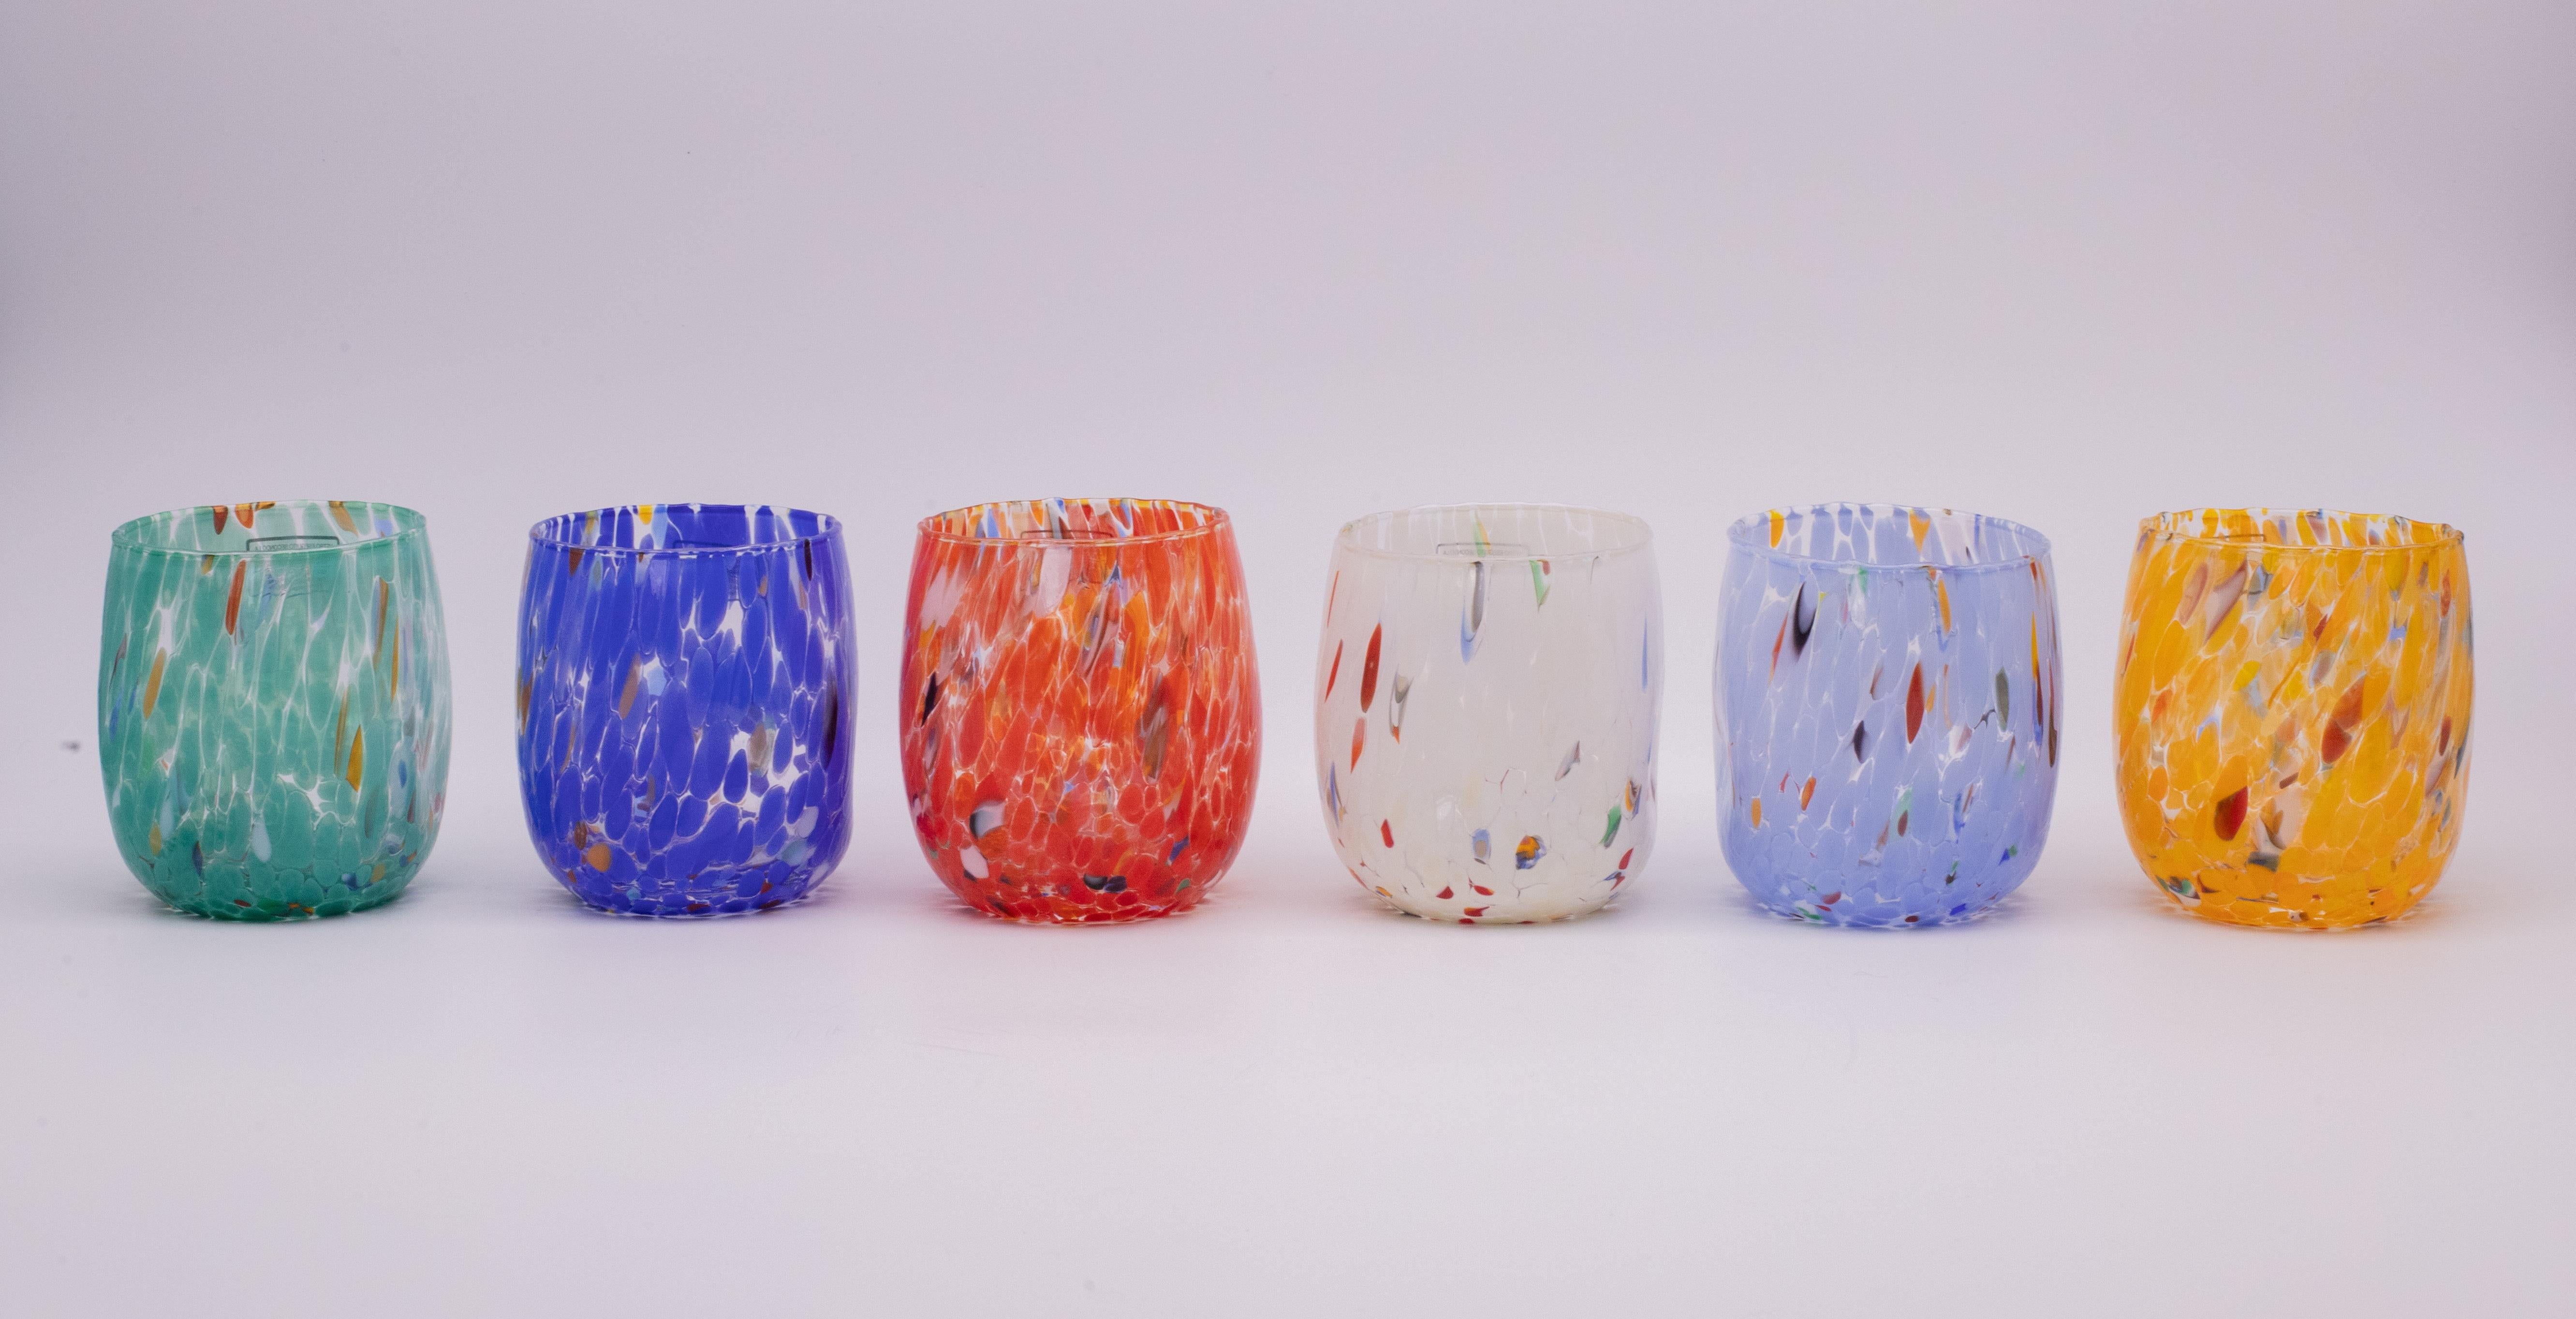 Set of six water/drink/wine glasses Multicolor - Murano glass - Made in Italy.

These individual Murano glasses are inspired by the classic 